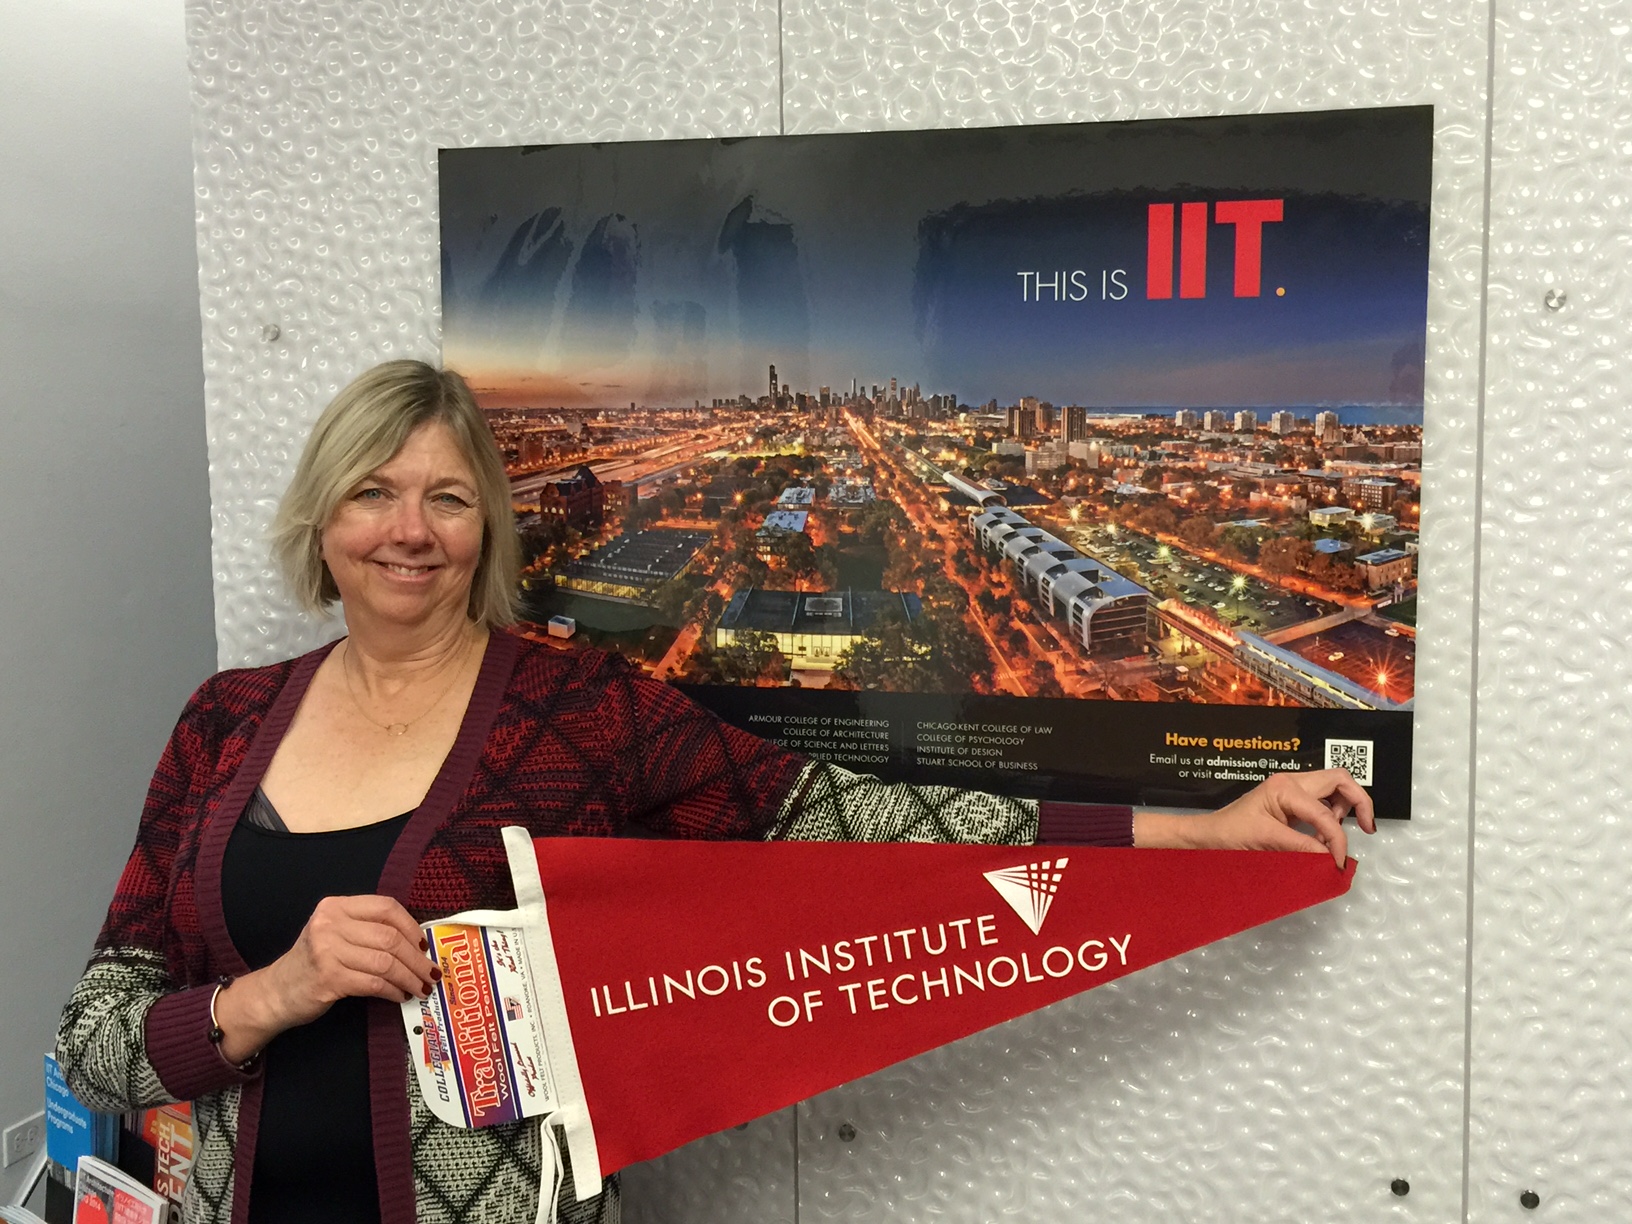 Sue at Illinois Institute of Technology